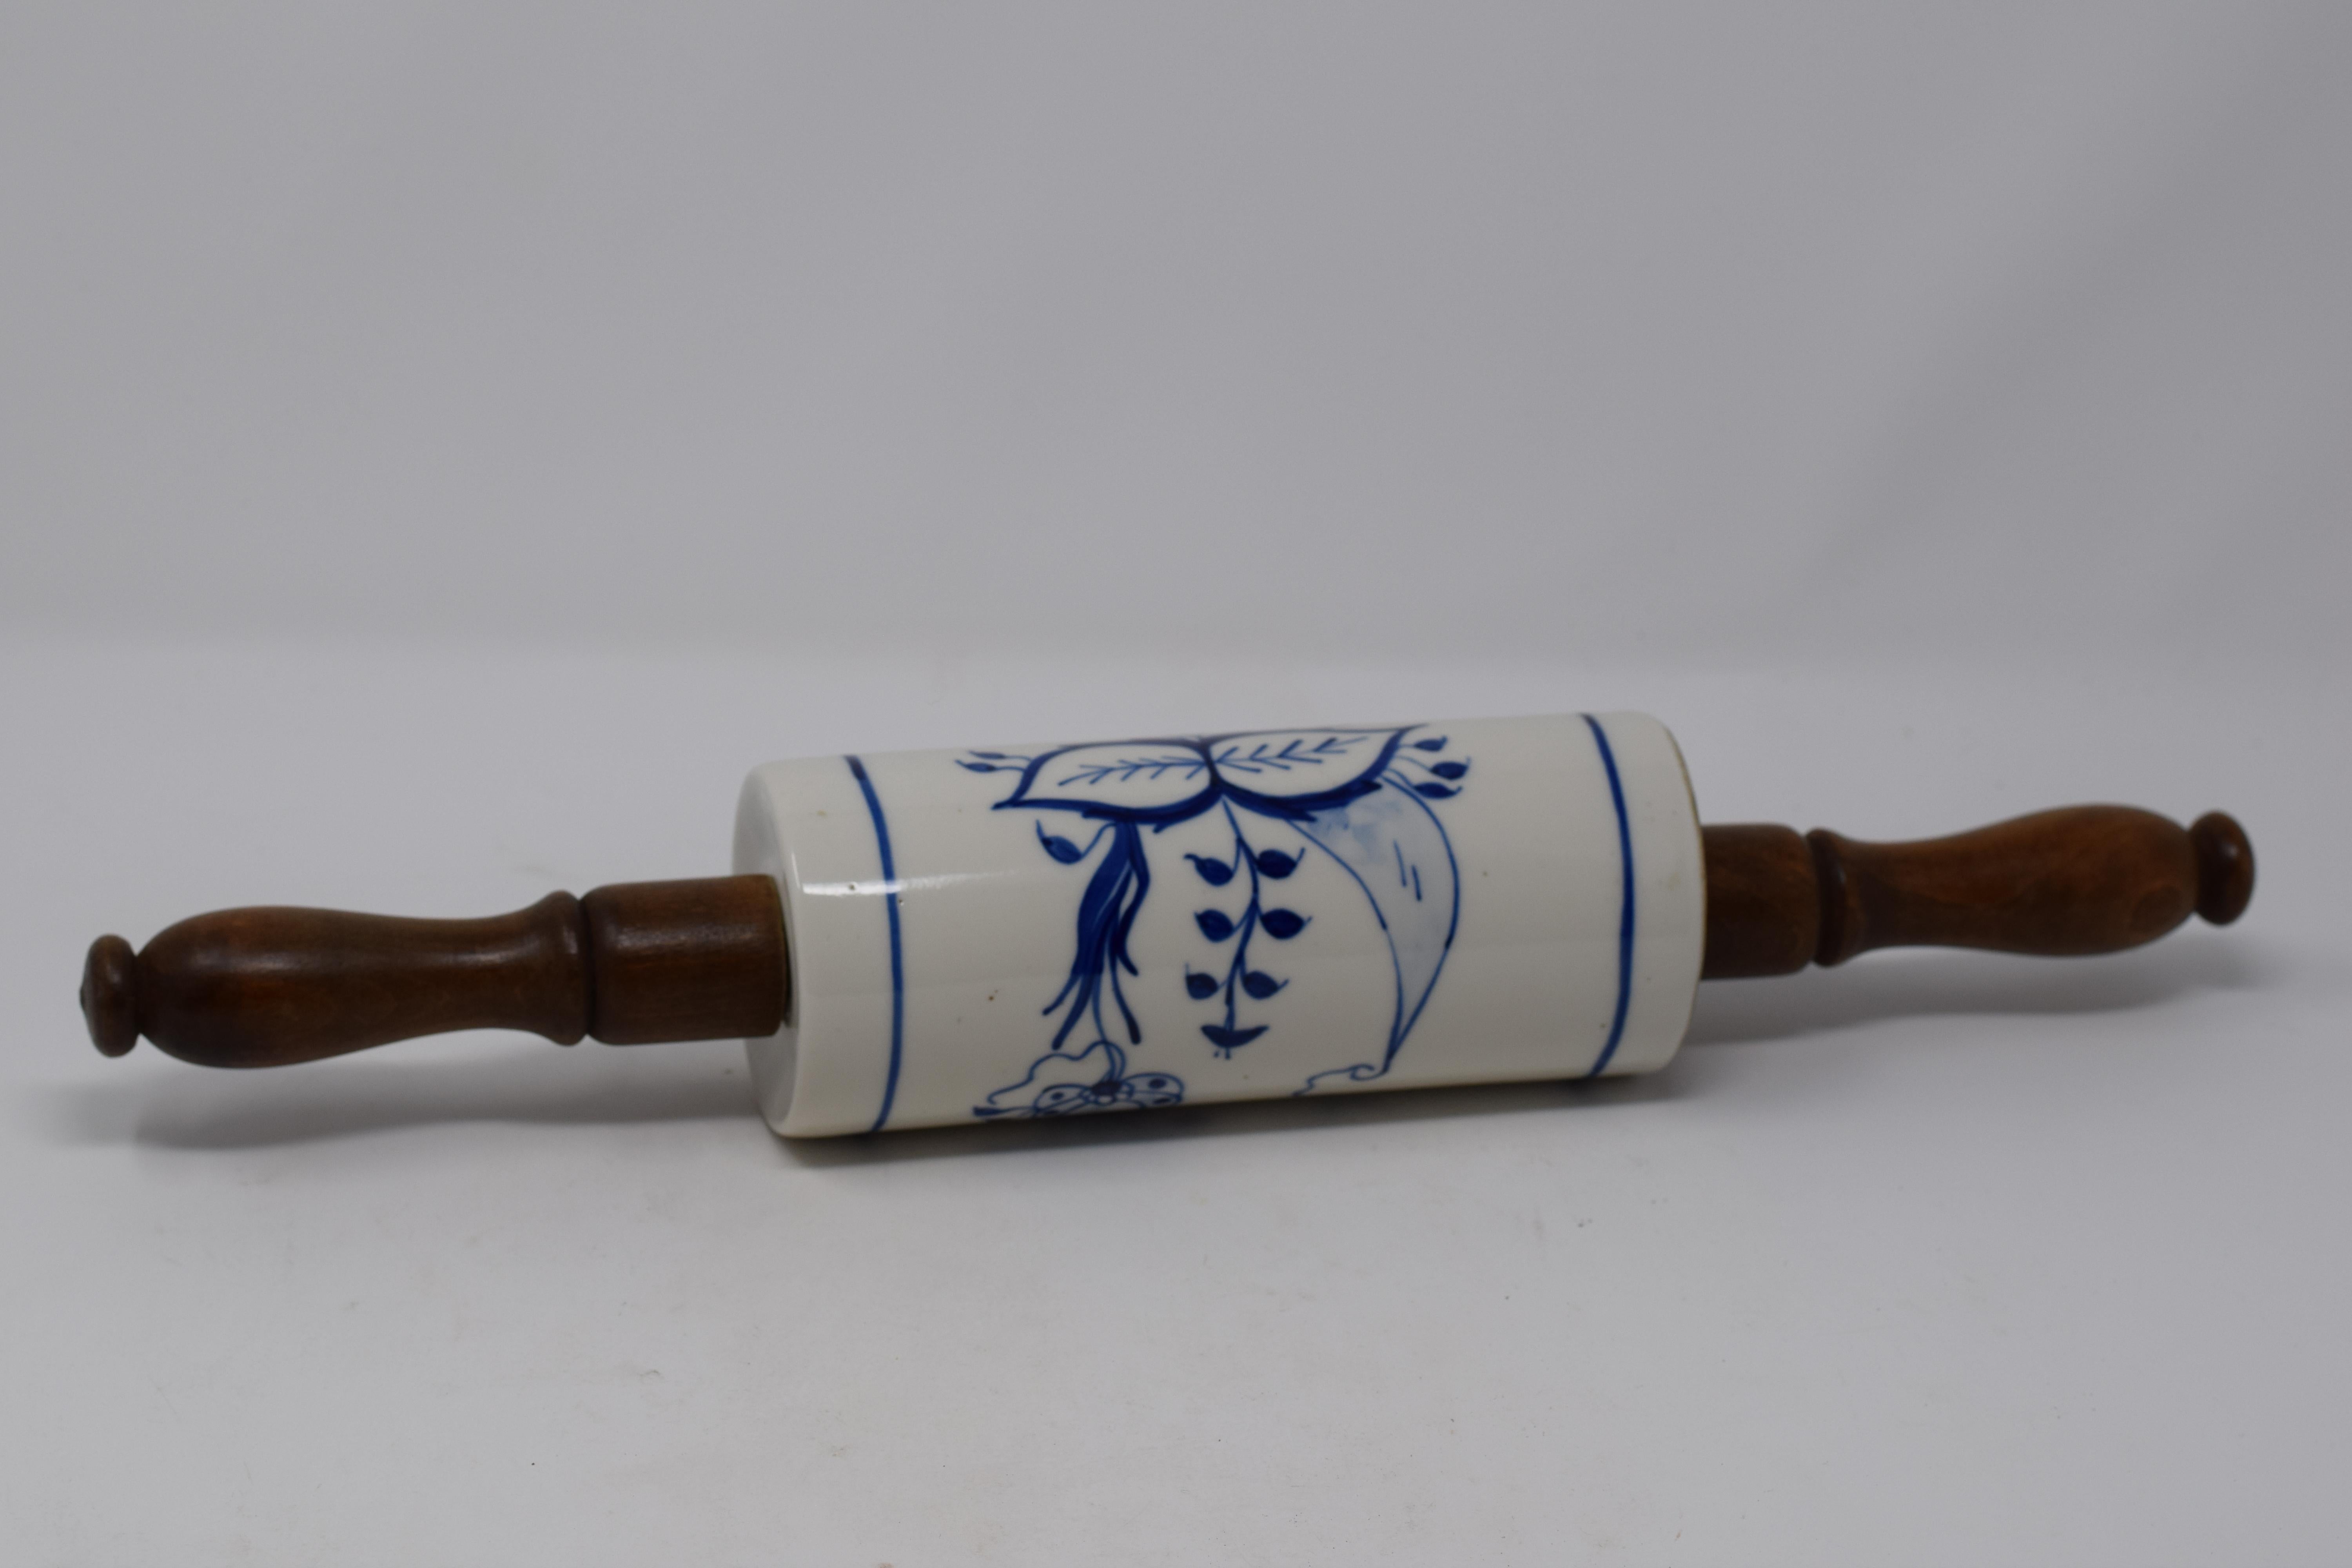 This is an antique German blue and white porcelain rolling pin with turned wood handles. The rolling pin has been well used and loved, there are no chips or repairs. We believe the piece is Meissen blue onion pattern although it is not marked.